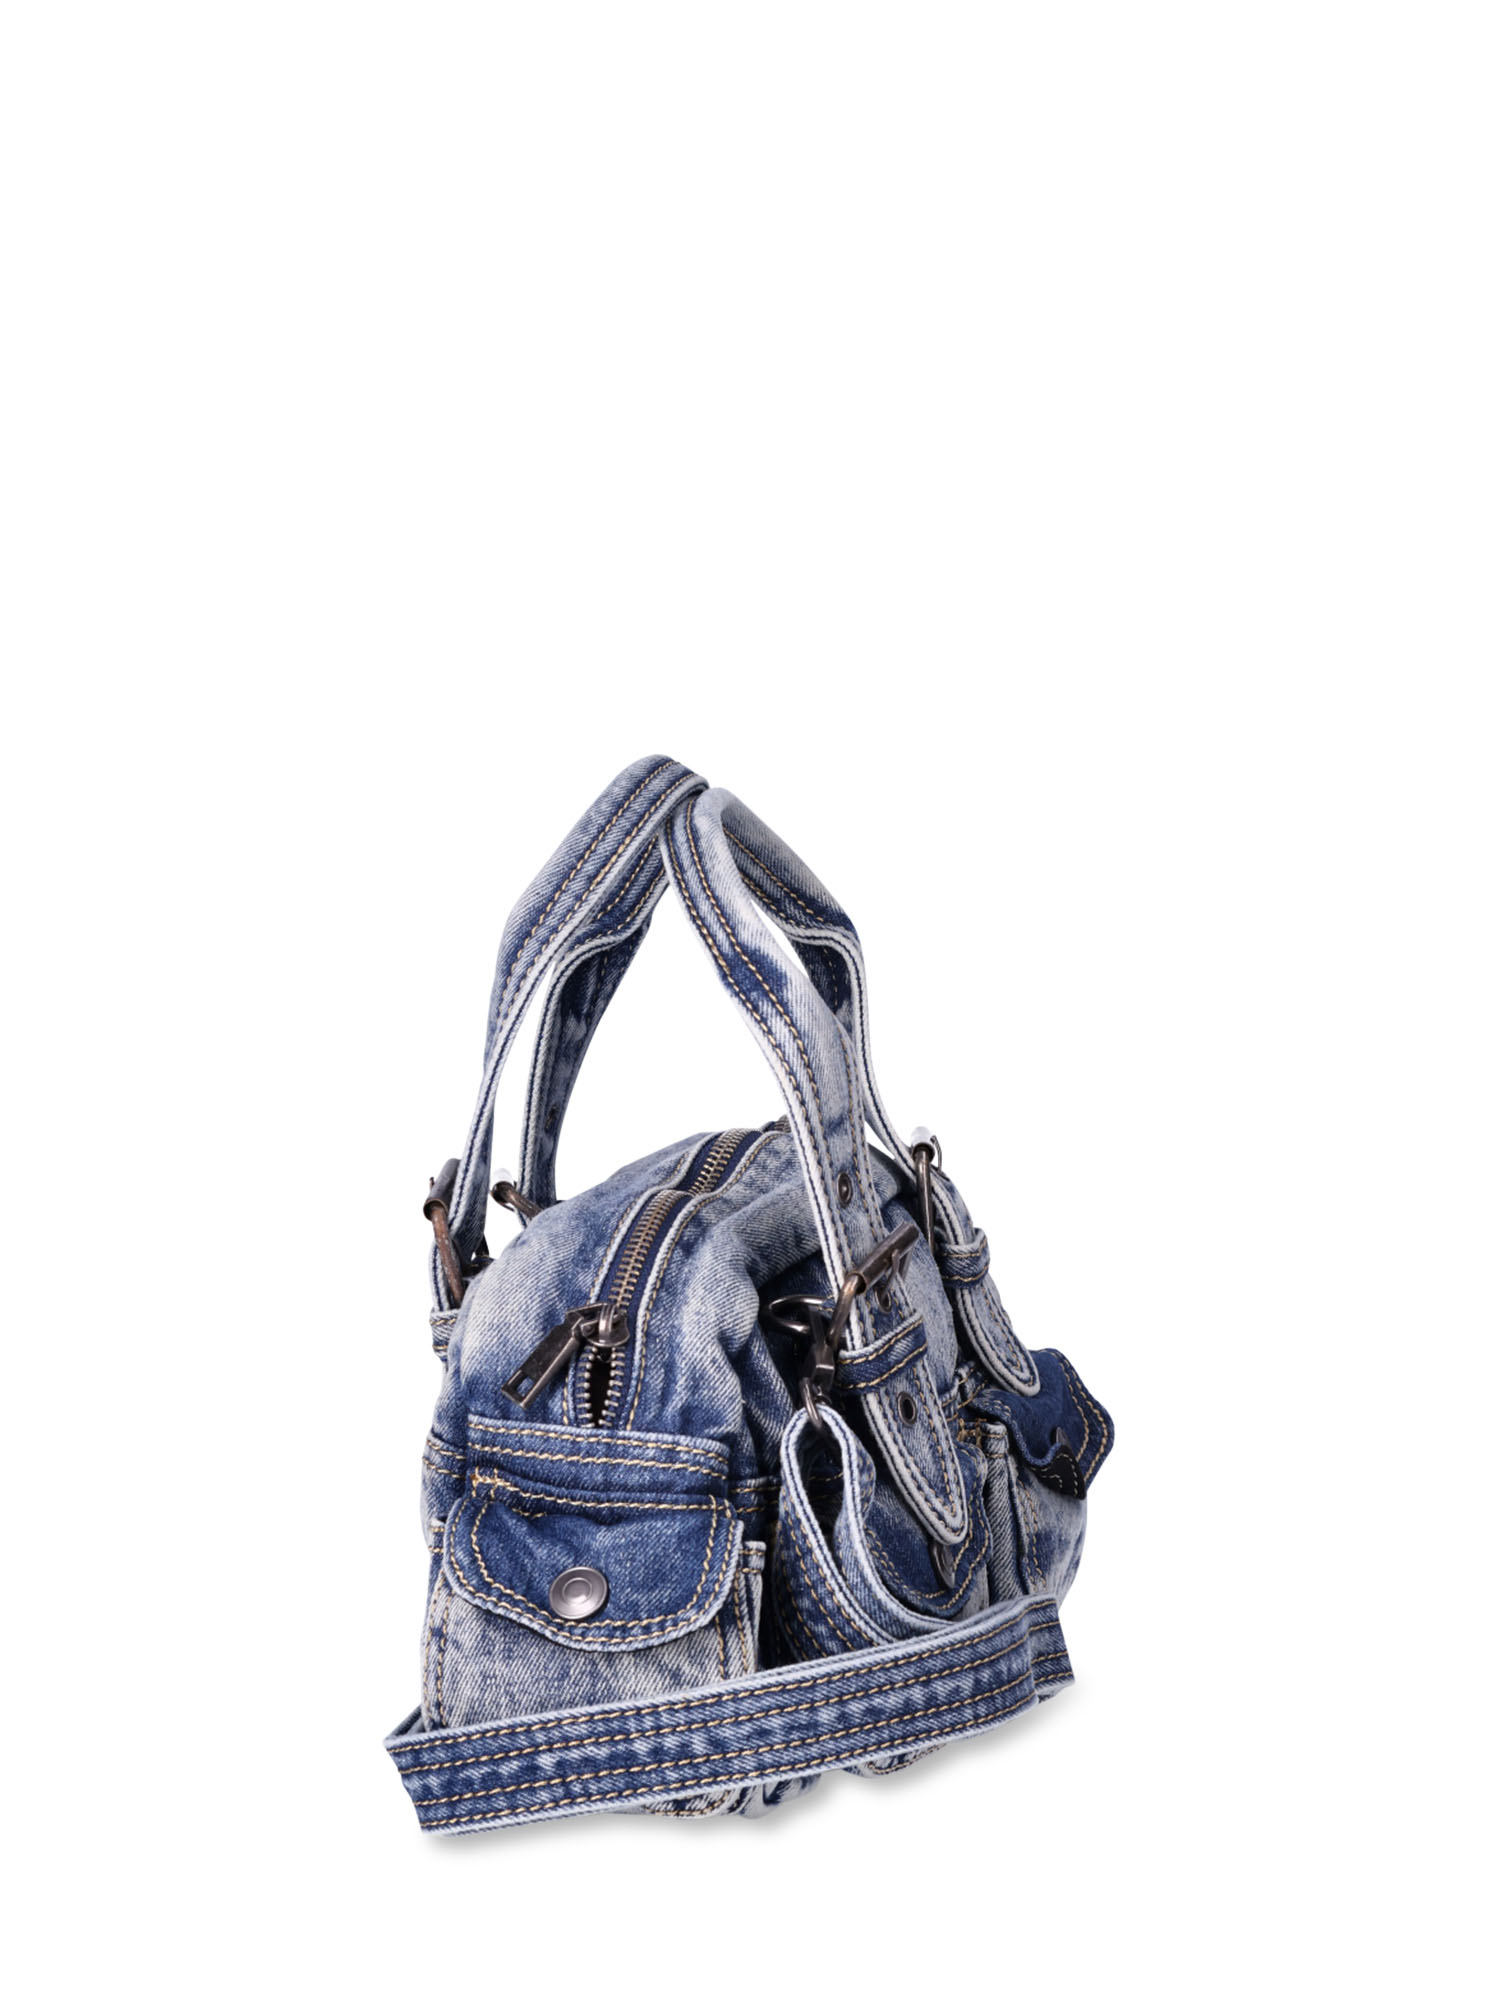 DIY JEANS LONG STRIP BAG IDEA OUT OF OLD JEANS // Cute Purse Bag From Jeans  Pants Recycle - YouTube